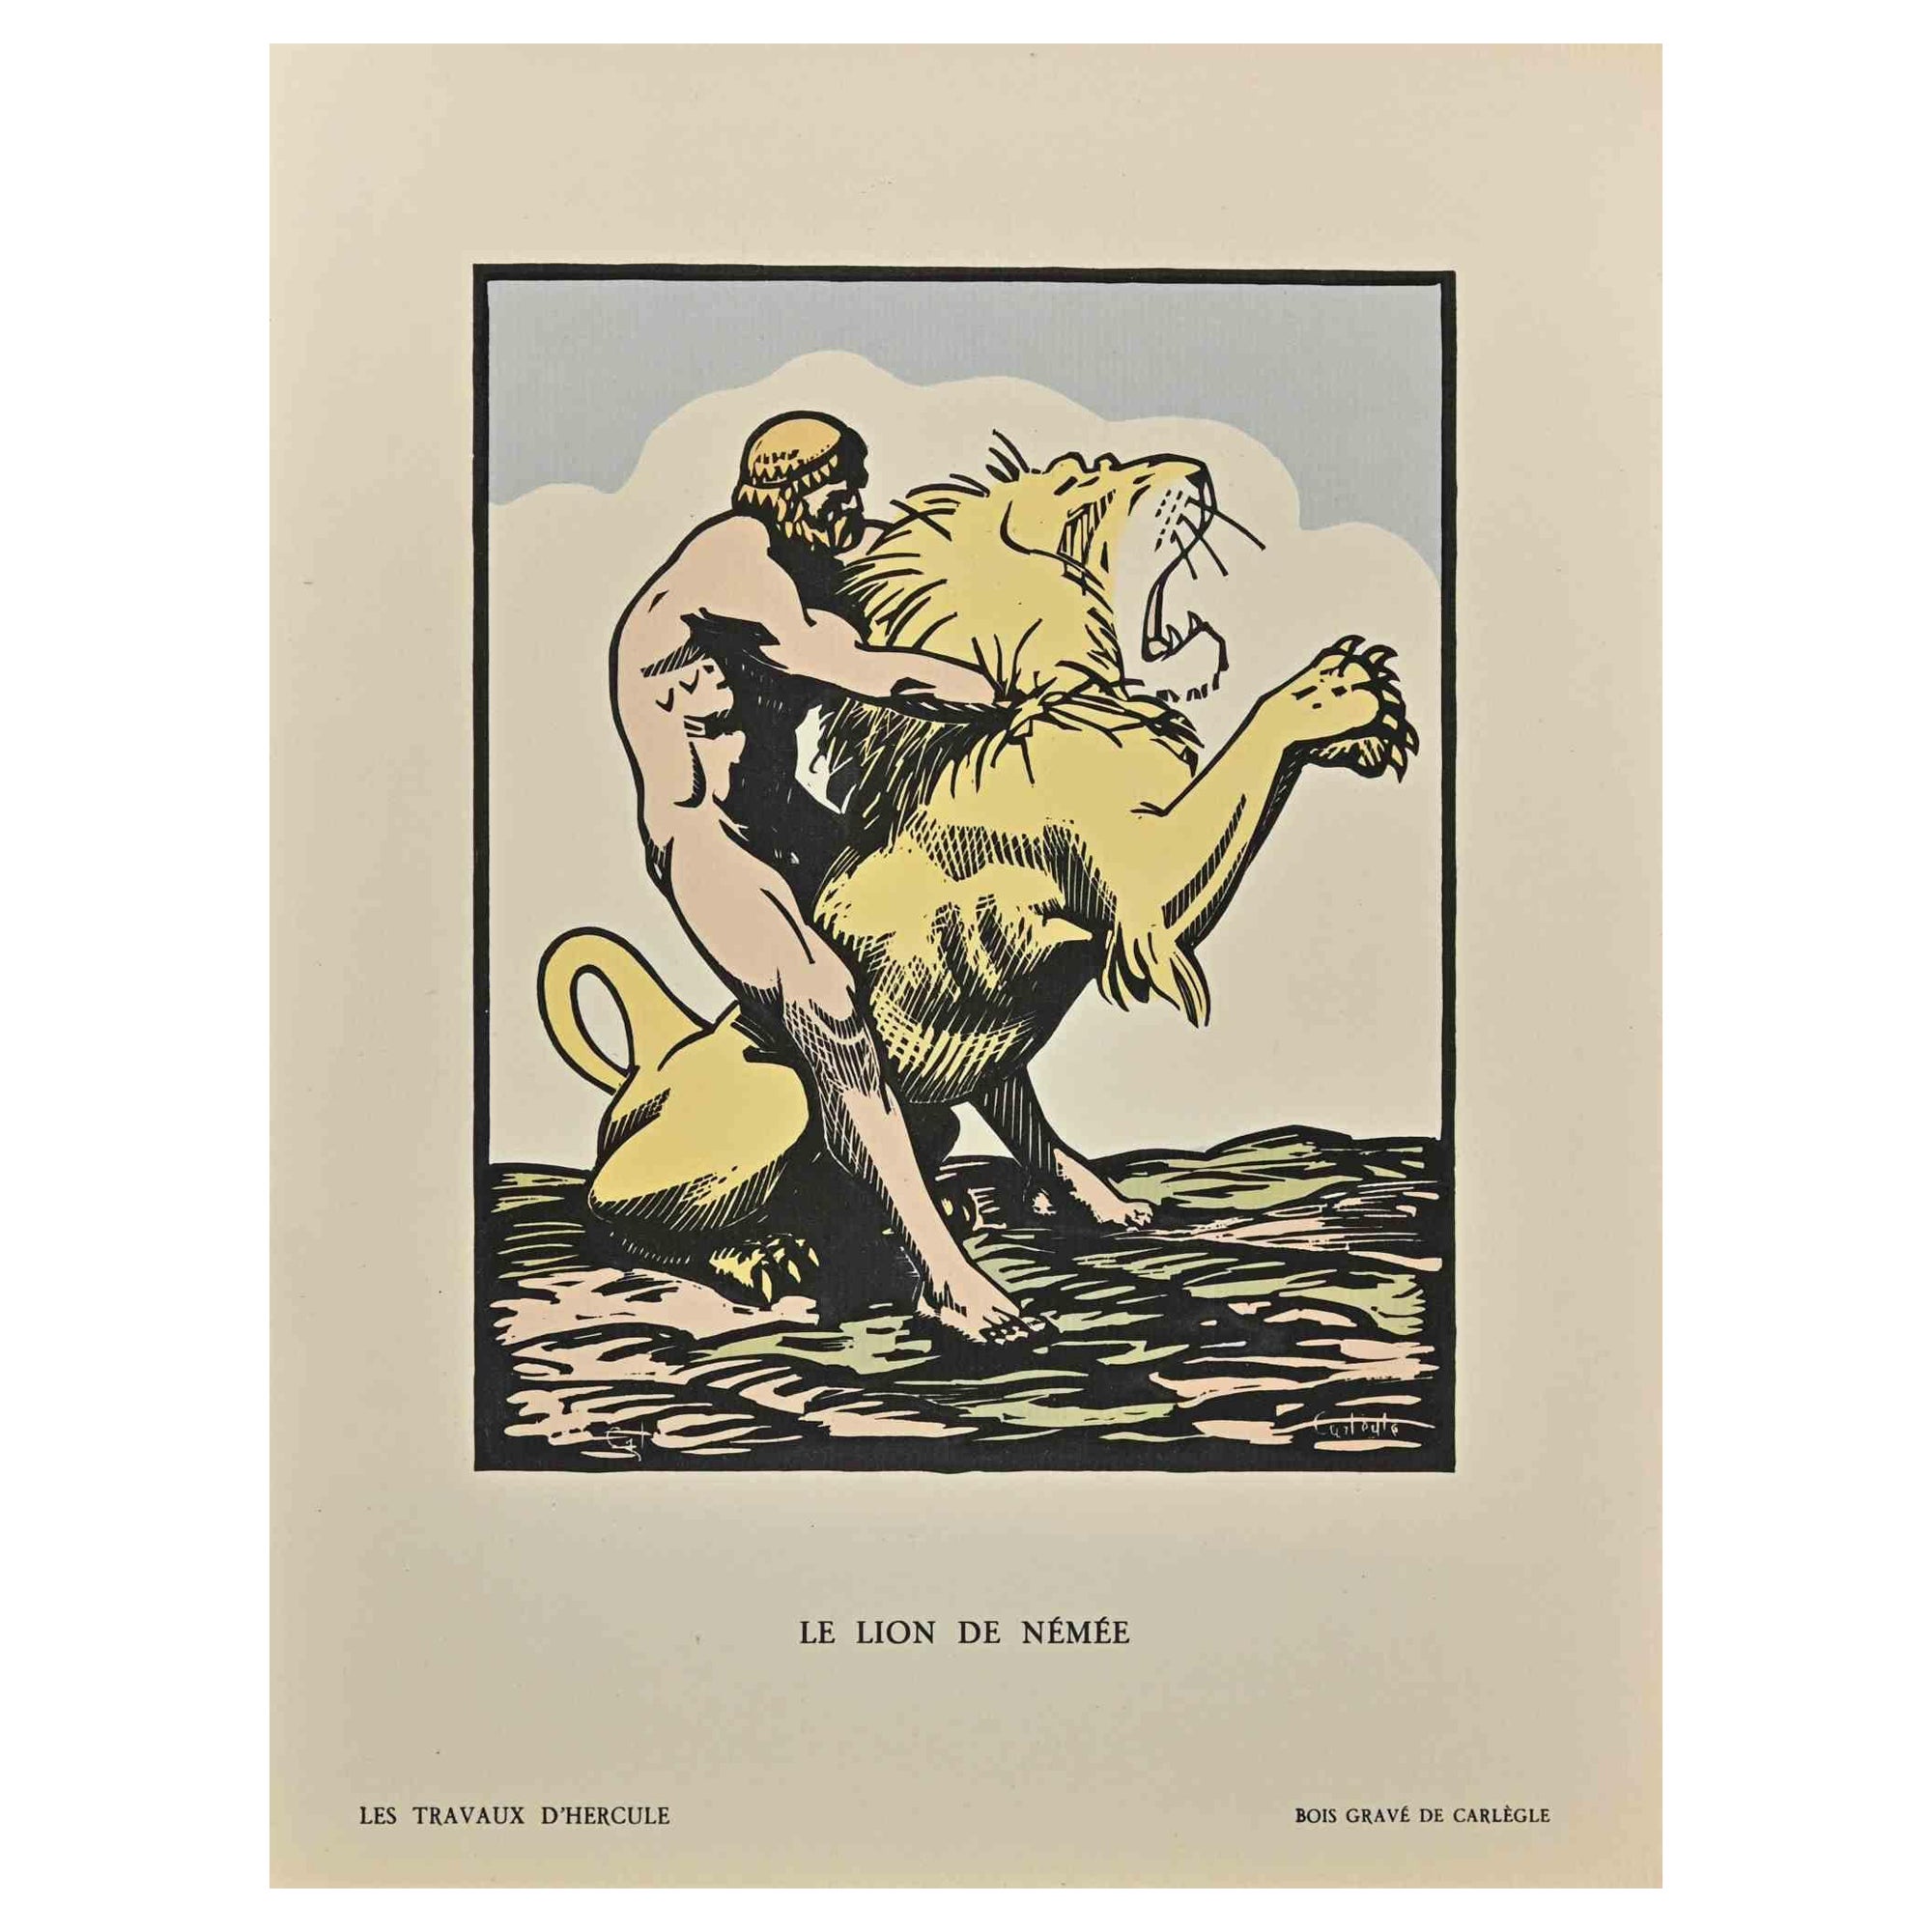 Le Lion De Némée is a Woodcut Print realized by Carlègle (Charles Emile Egli, 30 March 1877 – 11 January 1937).

Limited edition of 10 artwork unpublished Engraved Wood titled "Les Travaux D'Hercule".

Good condition on a yellowed